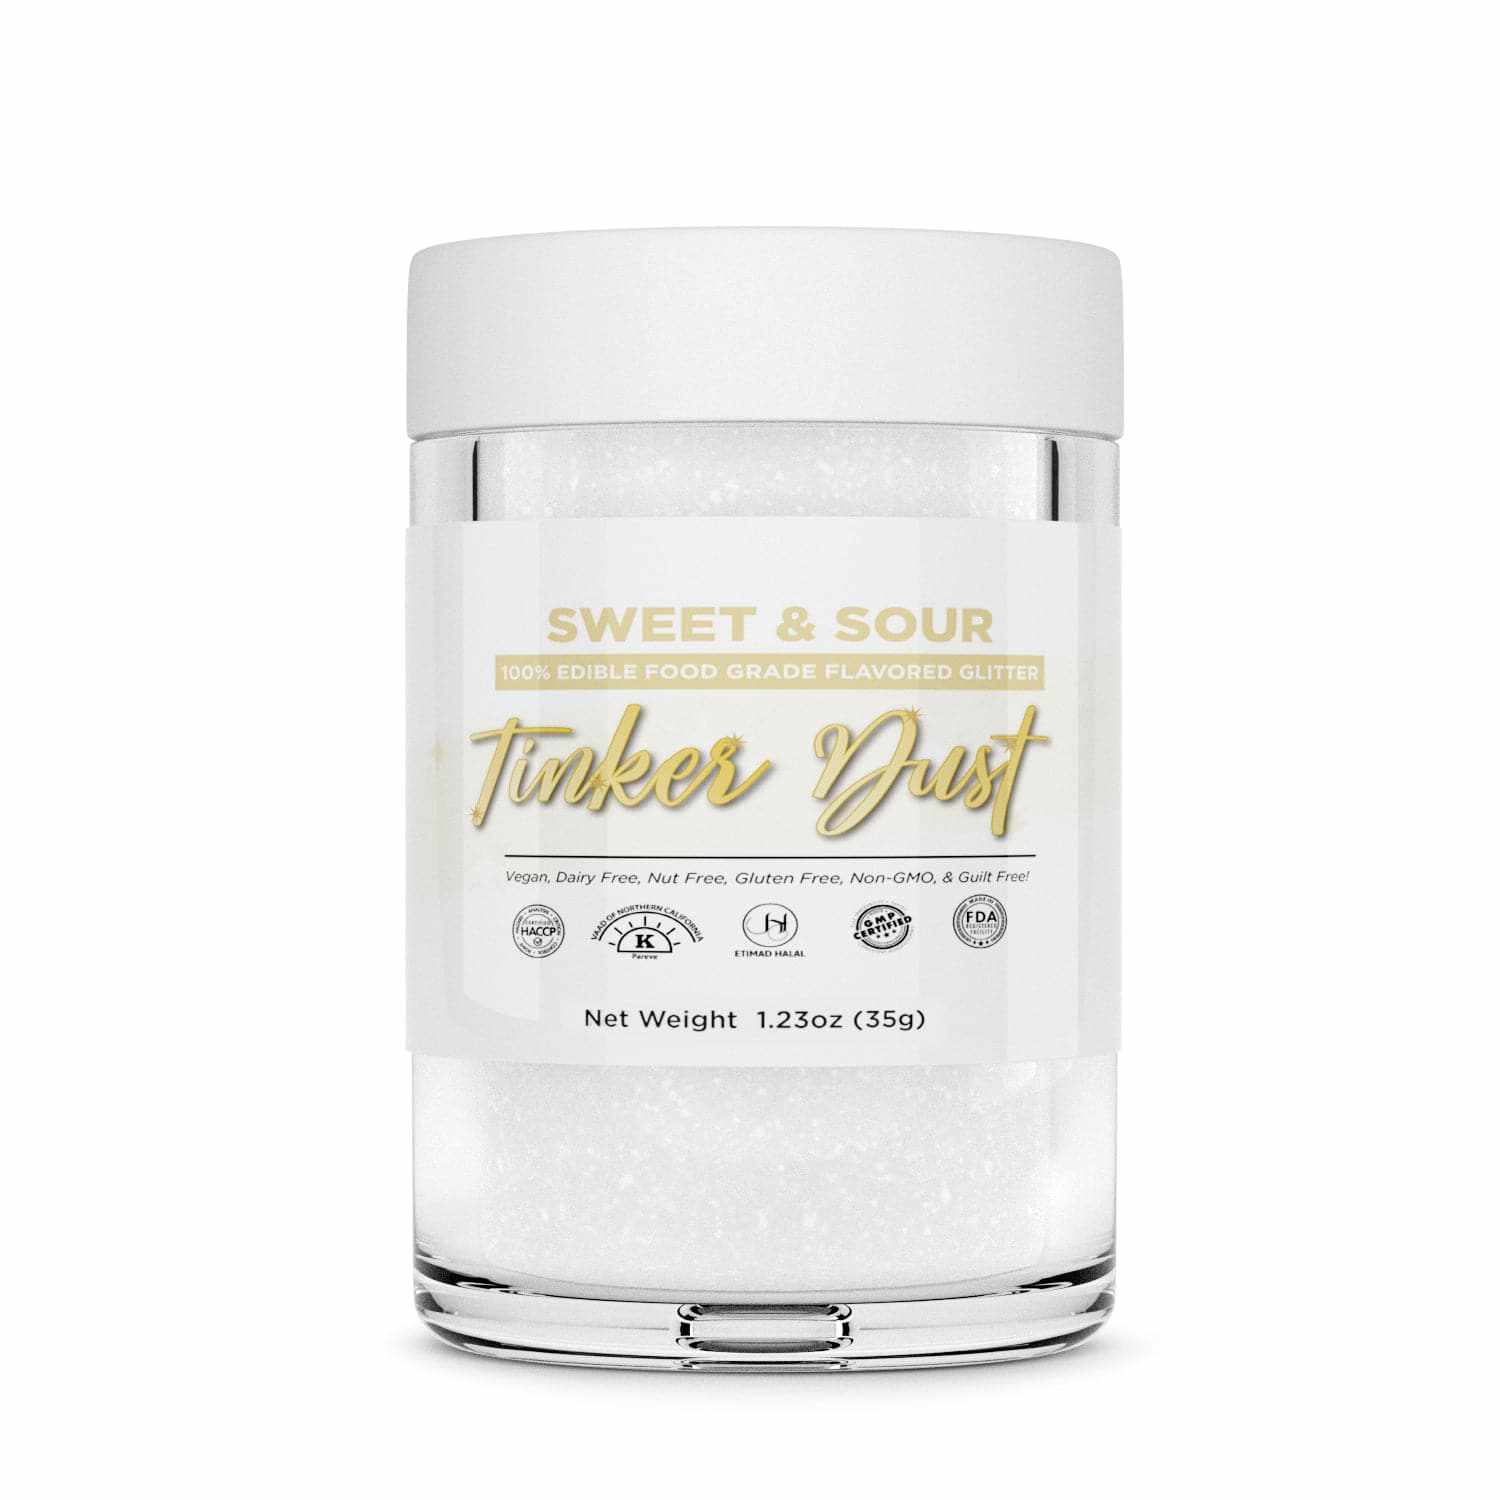 Buy Flavored Sweet & Sour Sugar Tinker Dust - Powder Candy - Bakell